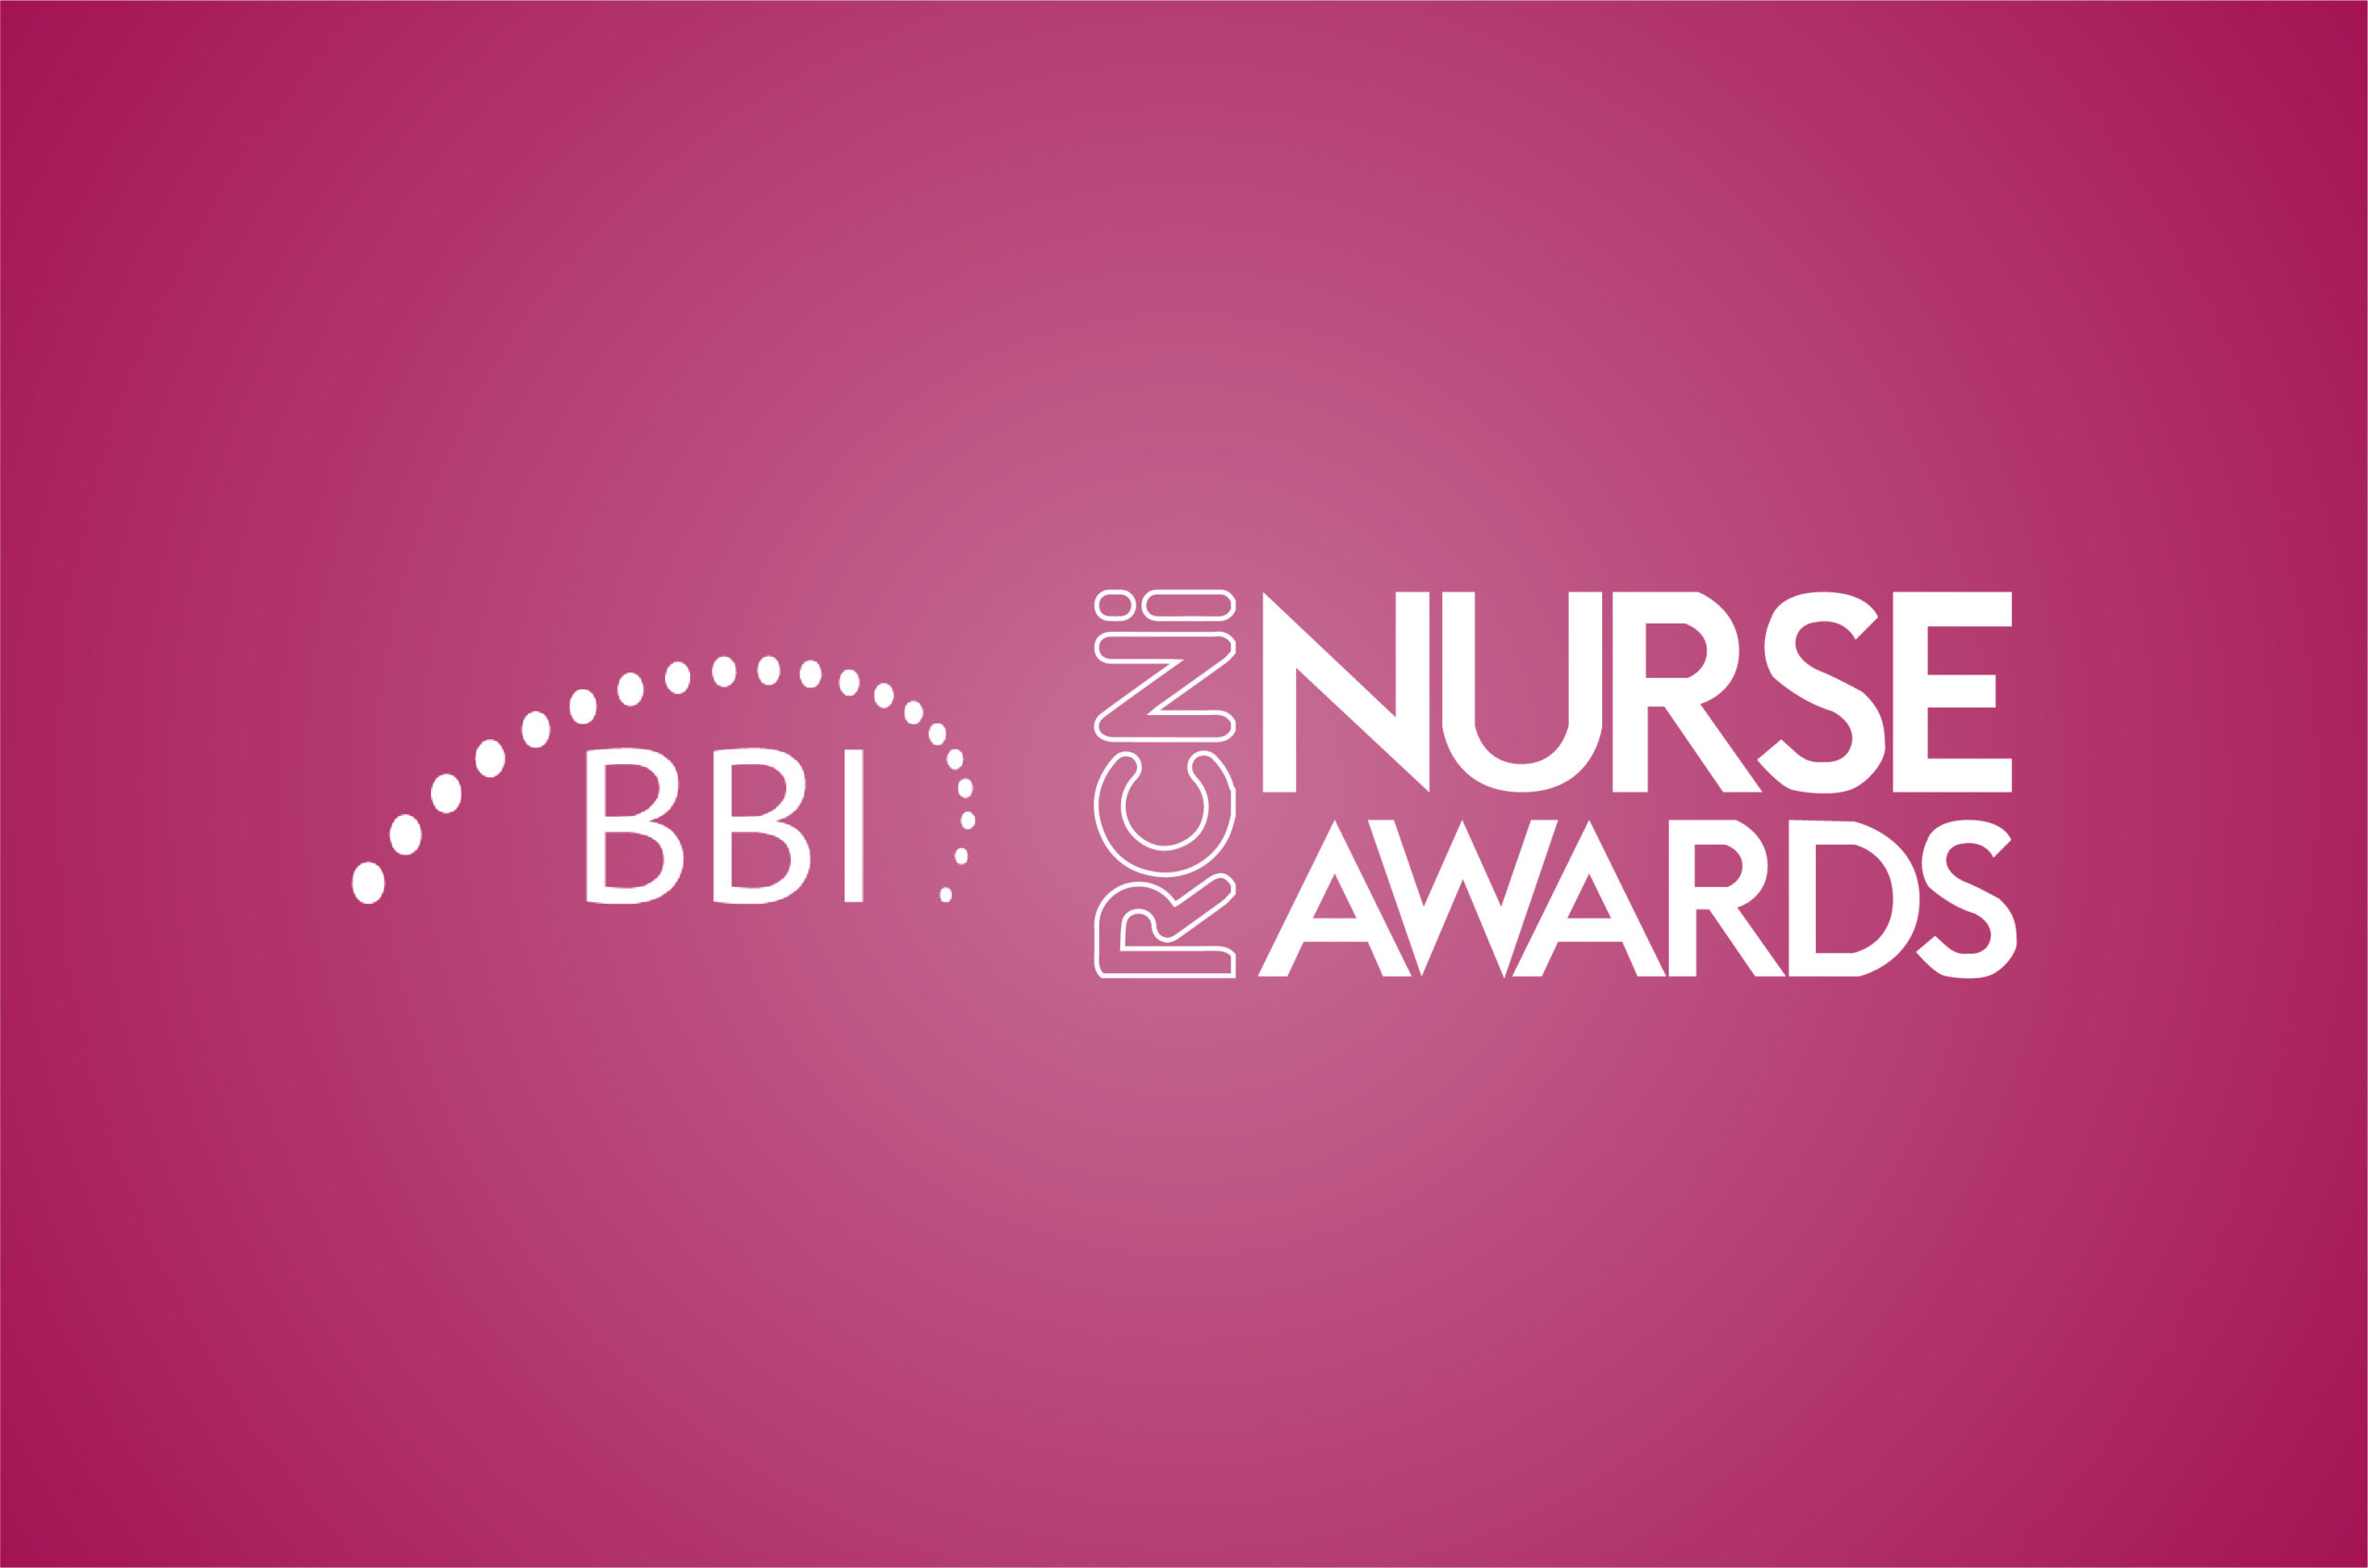 BBI is sponsoring the Wound Prevention & Treatment Award at the RCNi Awards